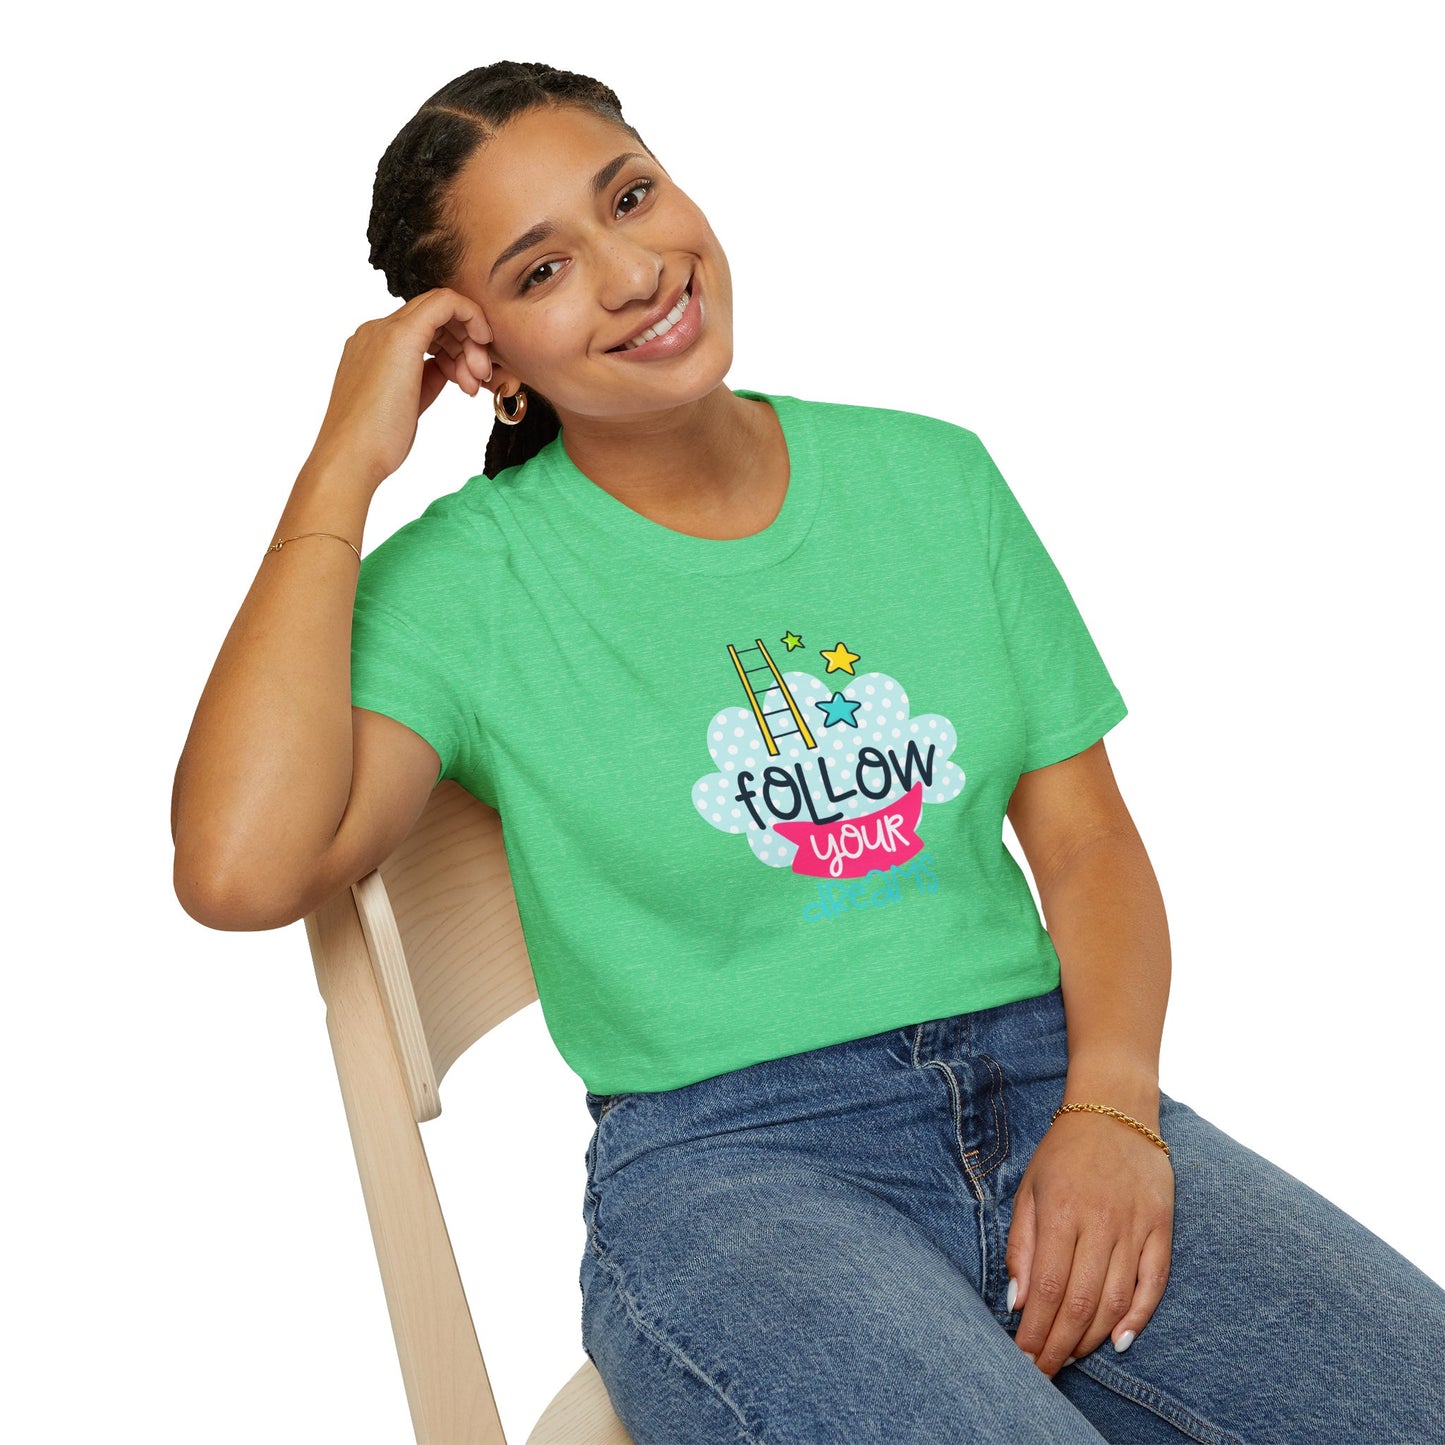 Chase Your Goals in Style with Our 'Follow Your Dreams' T-shirts - Inspire Every Step!